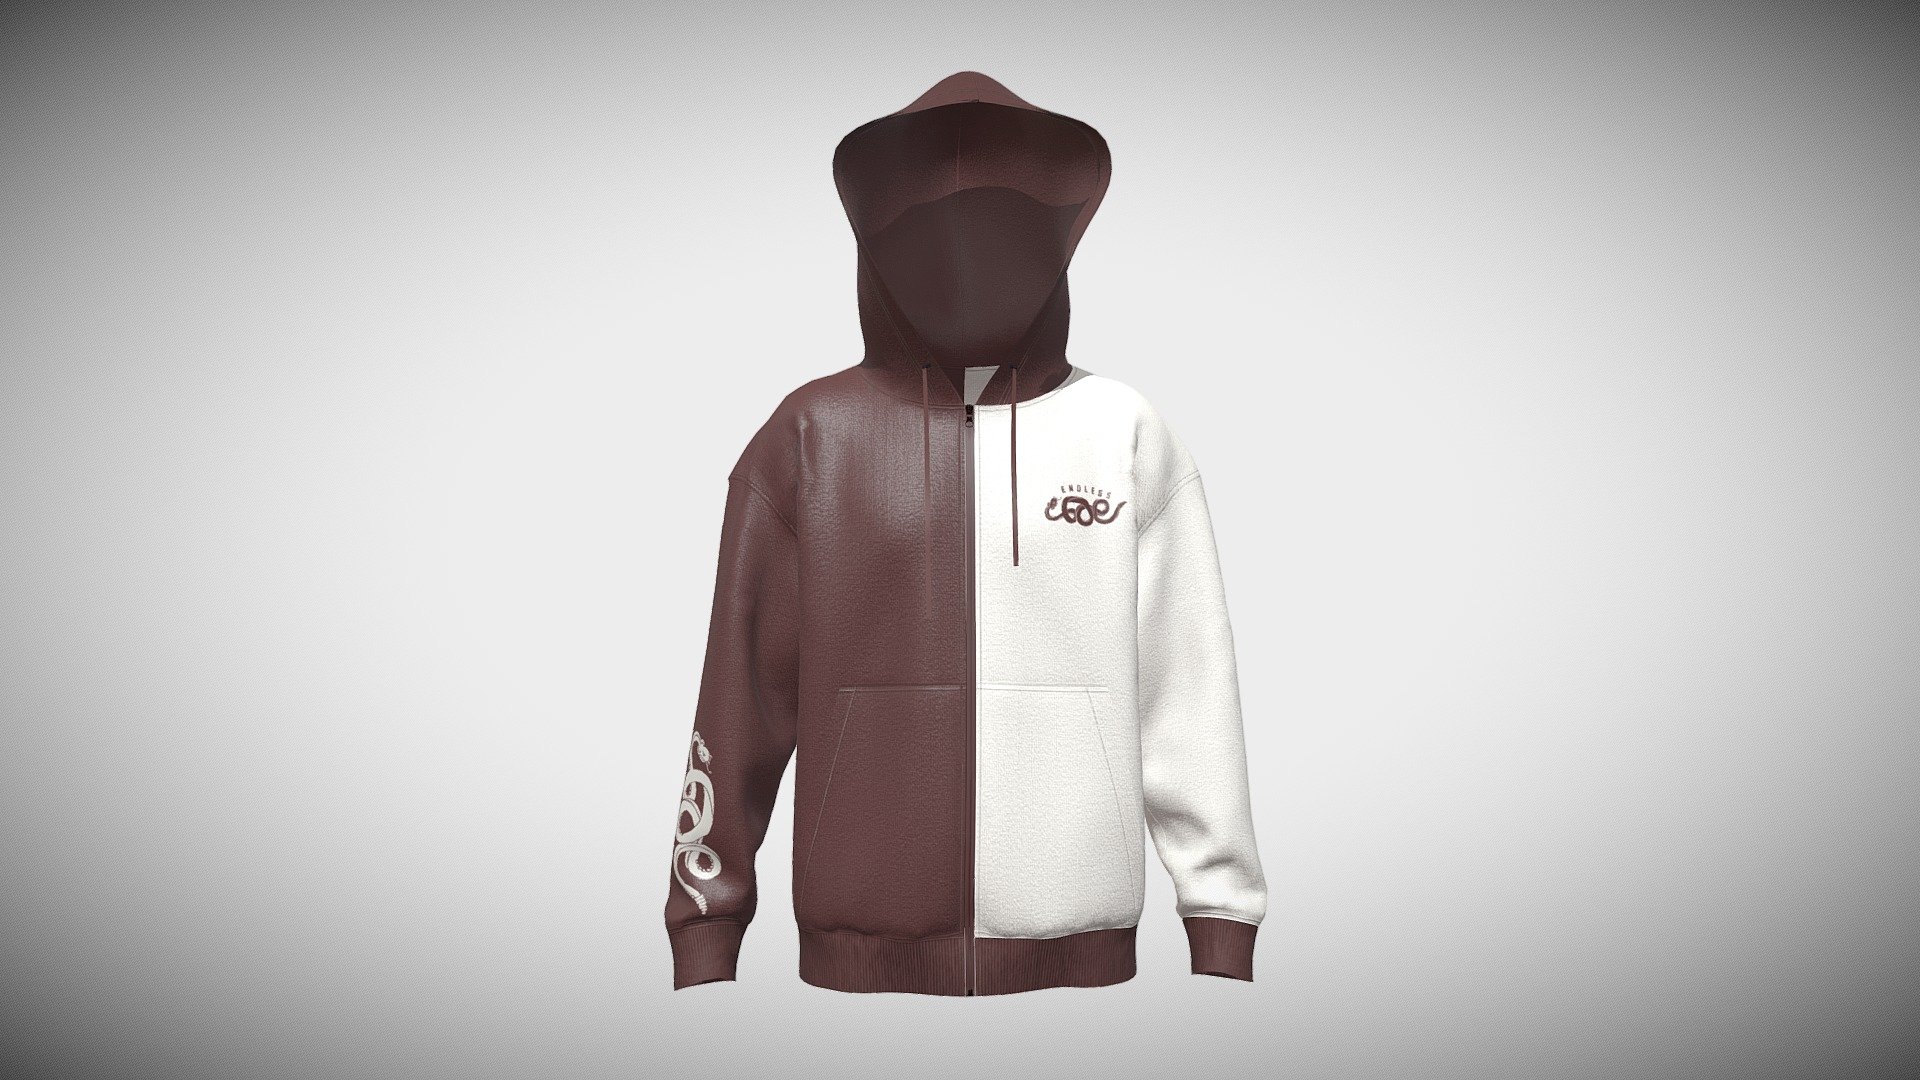 Men Two Tone Zip Up Hoodie

I am a Professional 3D Fashion/Apprel Designer. I have 7 years working experience about 3D Fashion. I am working with Clo3d, Marvelous Designer (MD), Daz3d, Blender, Cinema4d, Etc.

Features:
1.  2k UV Texture
2.  Triangle mesh
3.  Textures with Non-overlapping UV Map (2048x2048 Pixels)
4.  In additonal Textures folder have diffuse,displacement,metalness,normal,opacity,roughness maps.

Attachment Fils:
Exported Files (All are exported in DAZ Studio scale)
* OBJ
* FBX
* Marvelous Designer/Clo3d file (zprj)

Thanks 3d model